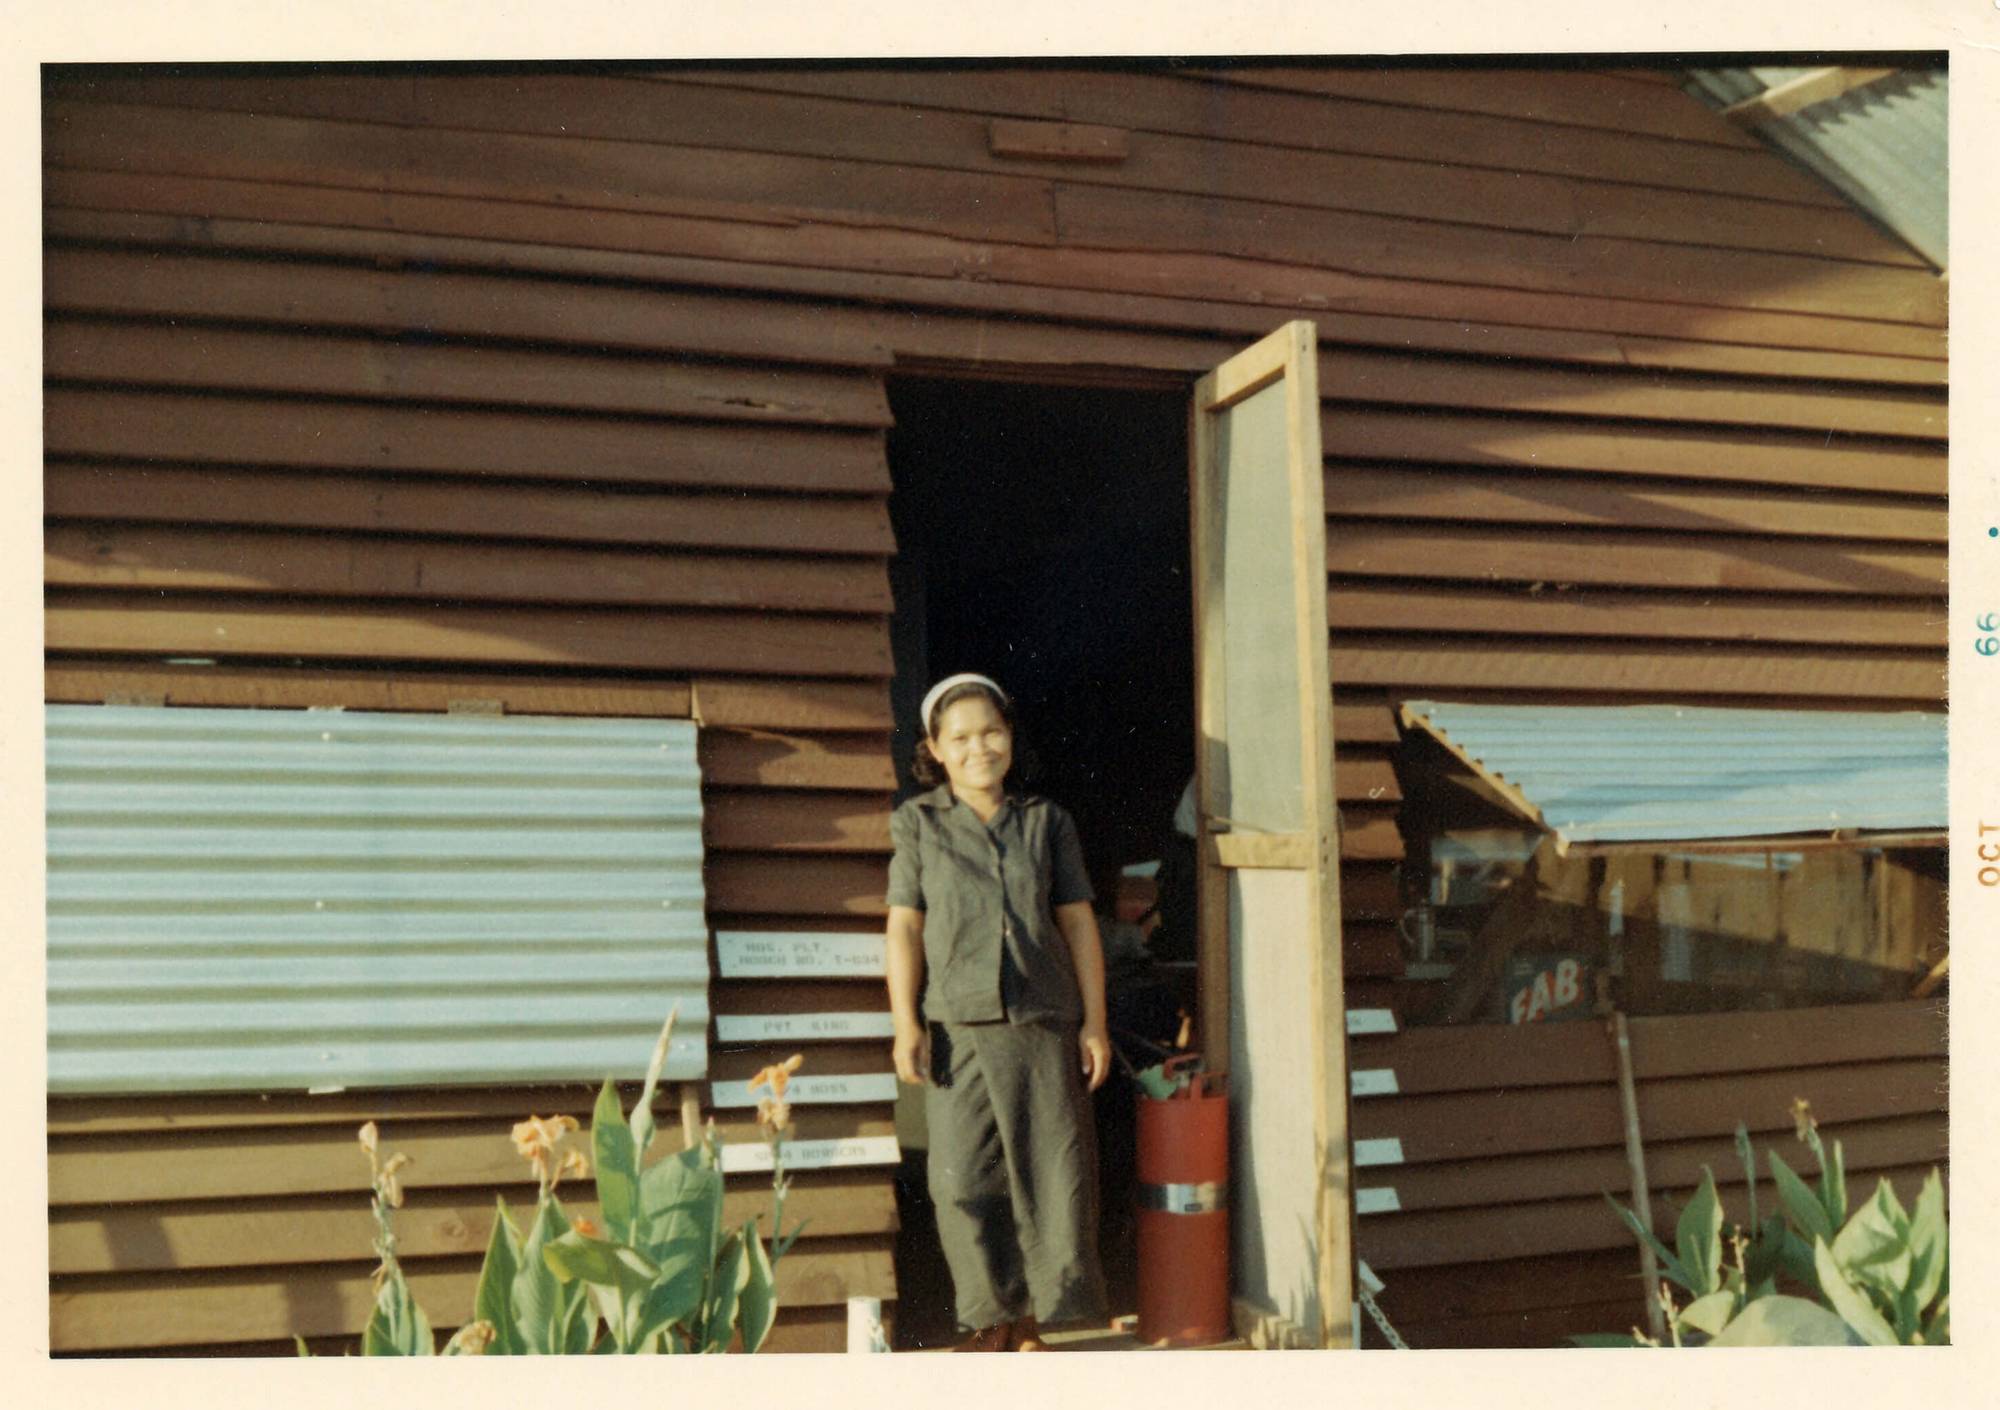 A young Asian woman standing in a doorway. Photo margin indicates the photo is from October 1966.